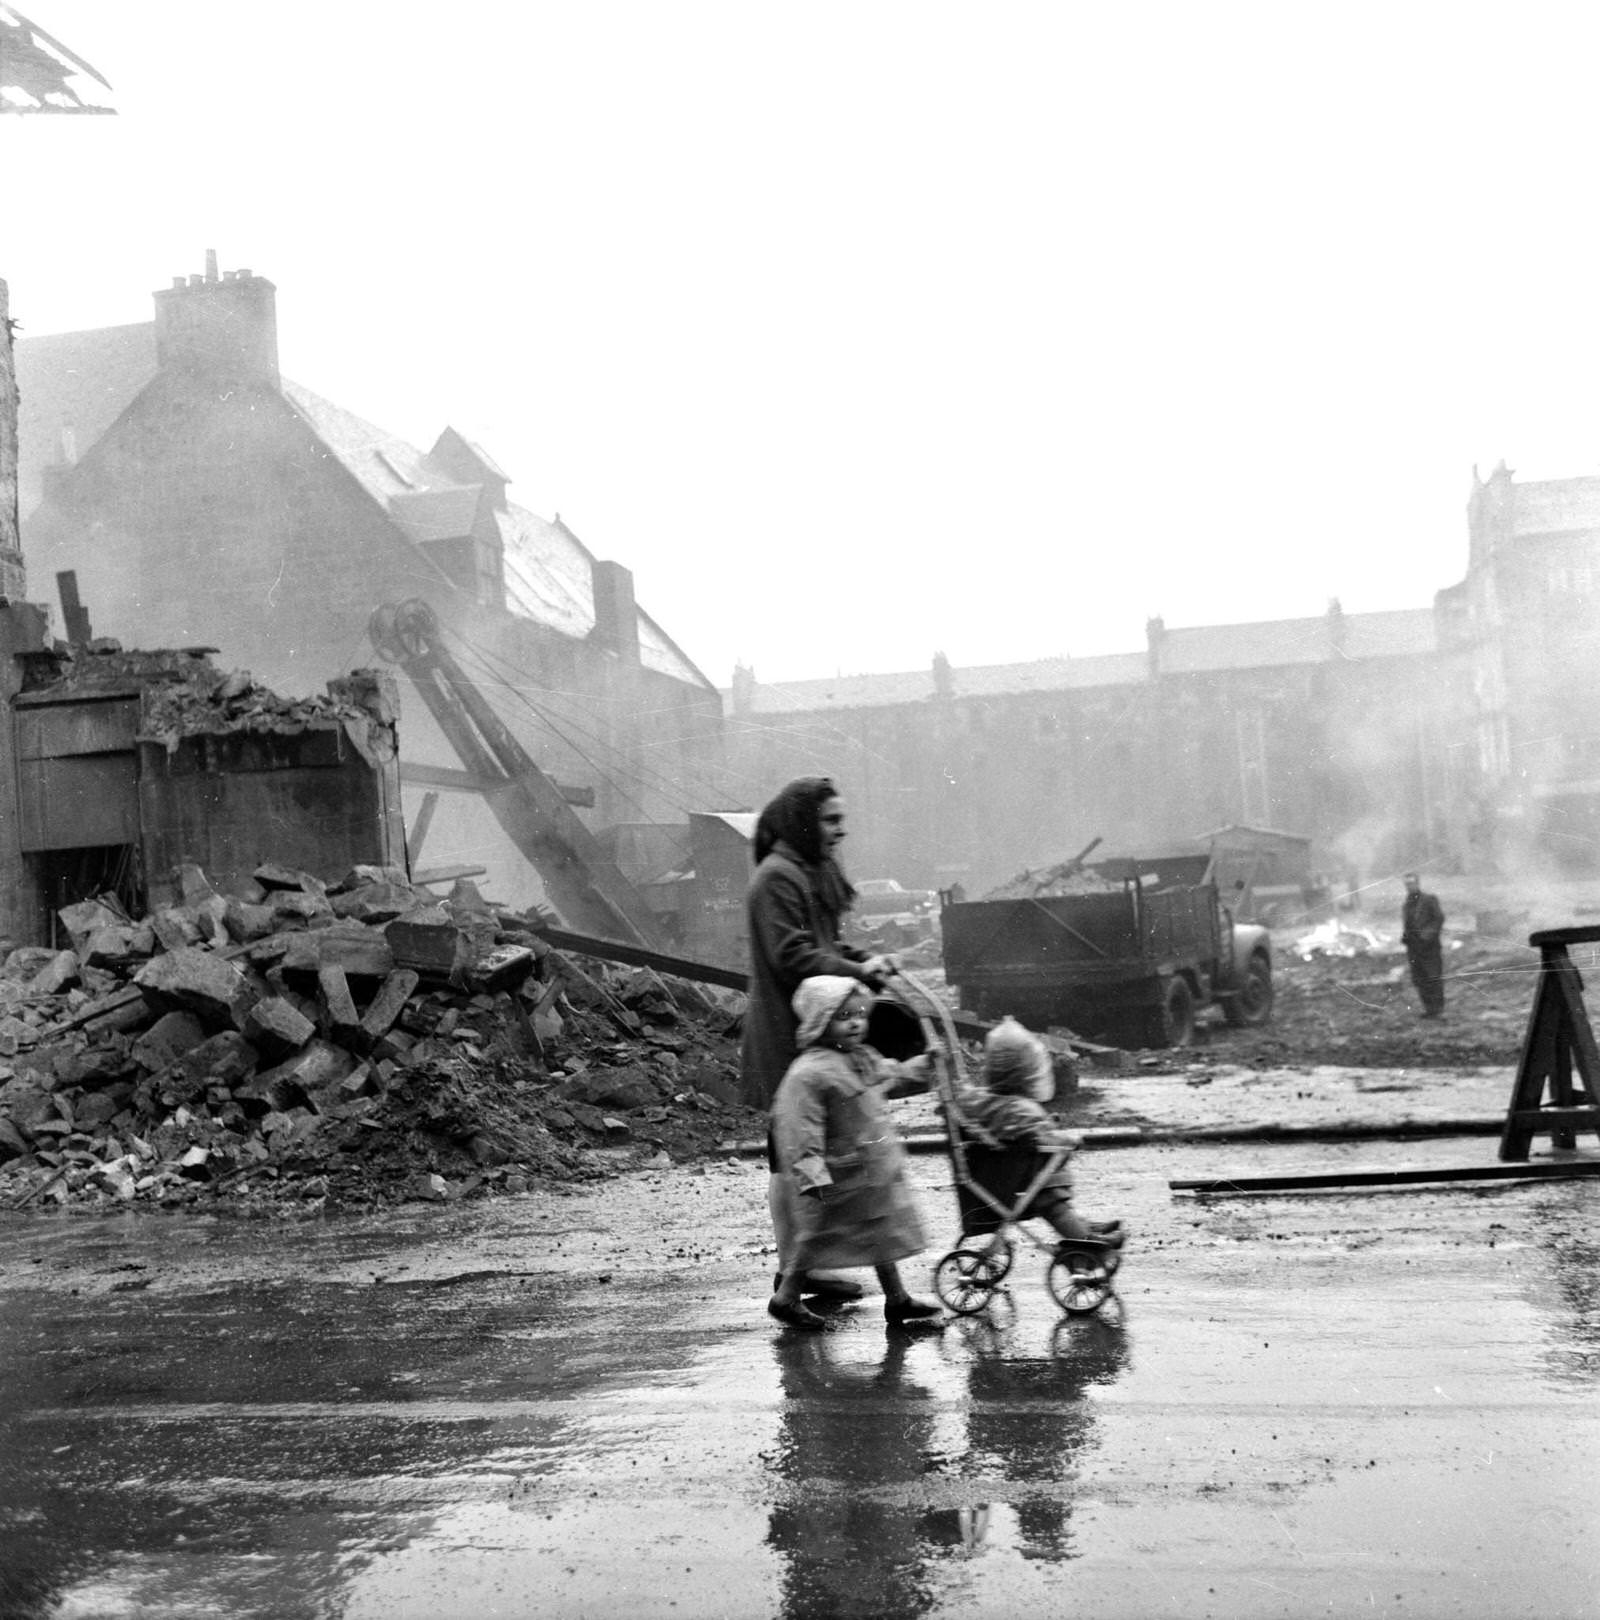 A woman with two young children walking past a demolition site in the Gorbals area of Glasgow, 1962